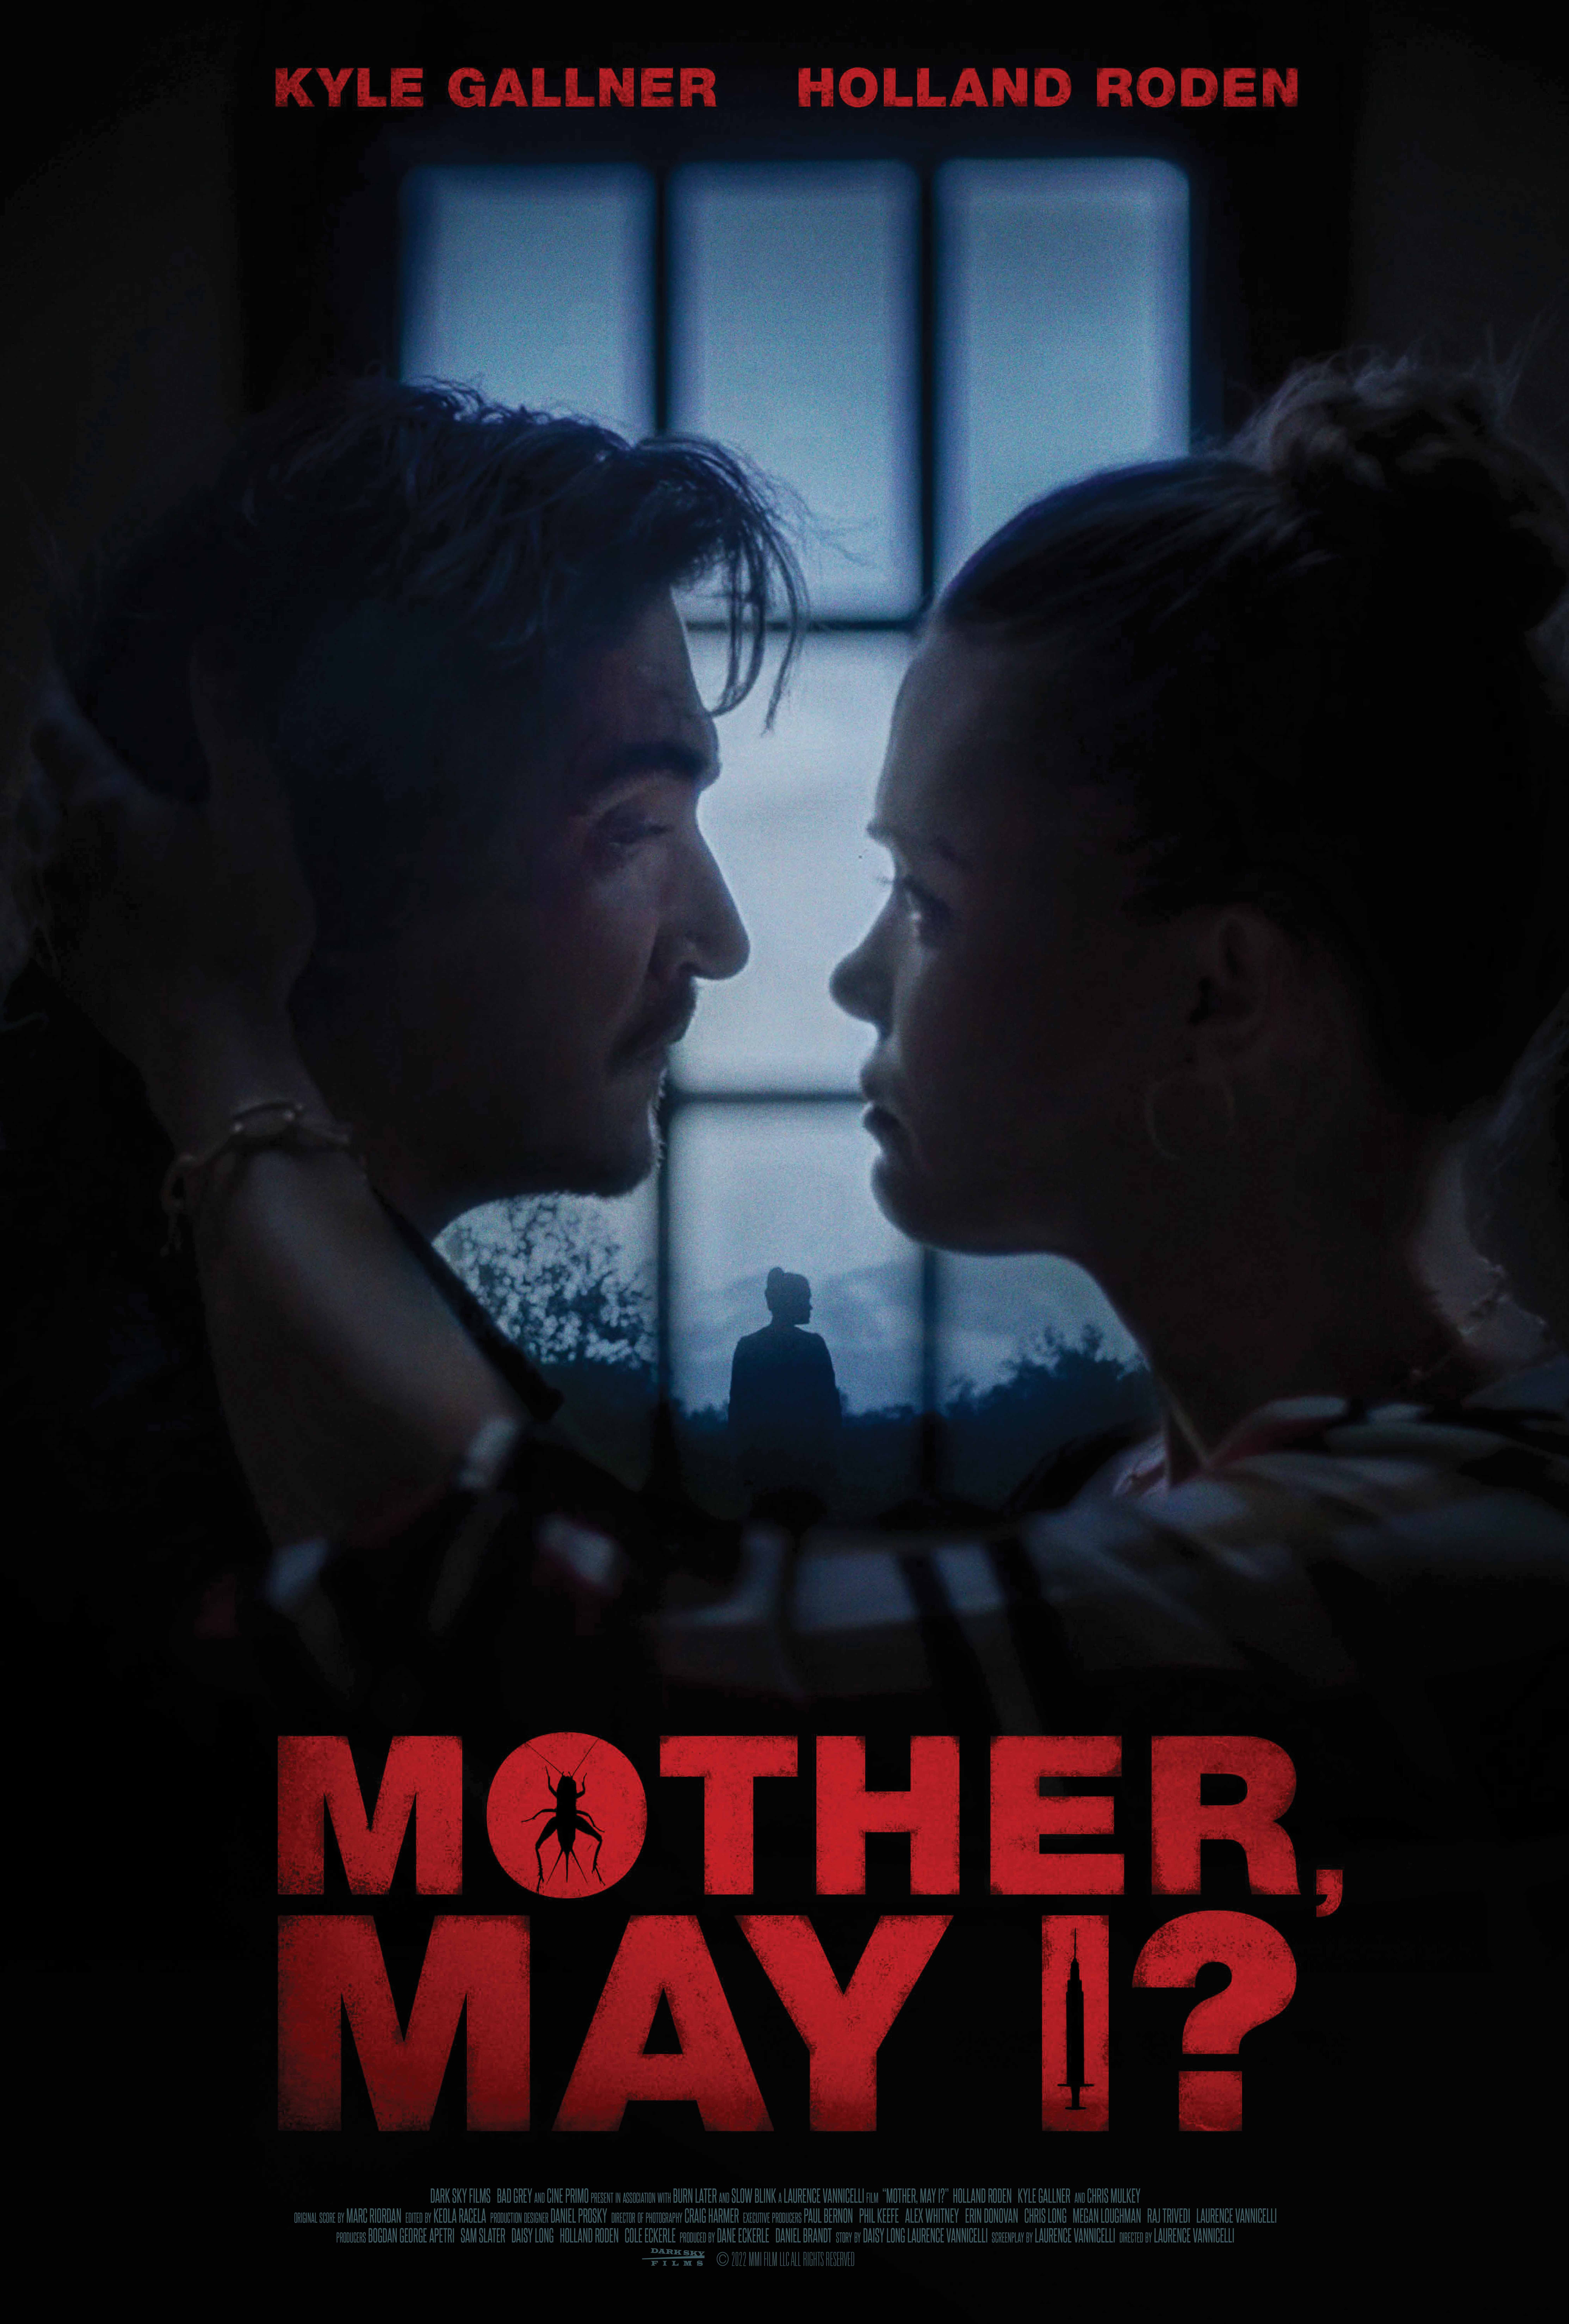 "Mother, May I?" - A Riveting Psychological Thriller Featuring Kyle Gallner and Holland Roden Set to Hit Theaters and VOD on July 21st 26